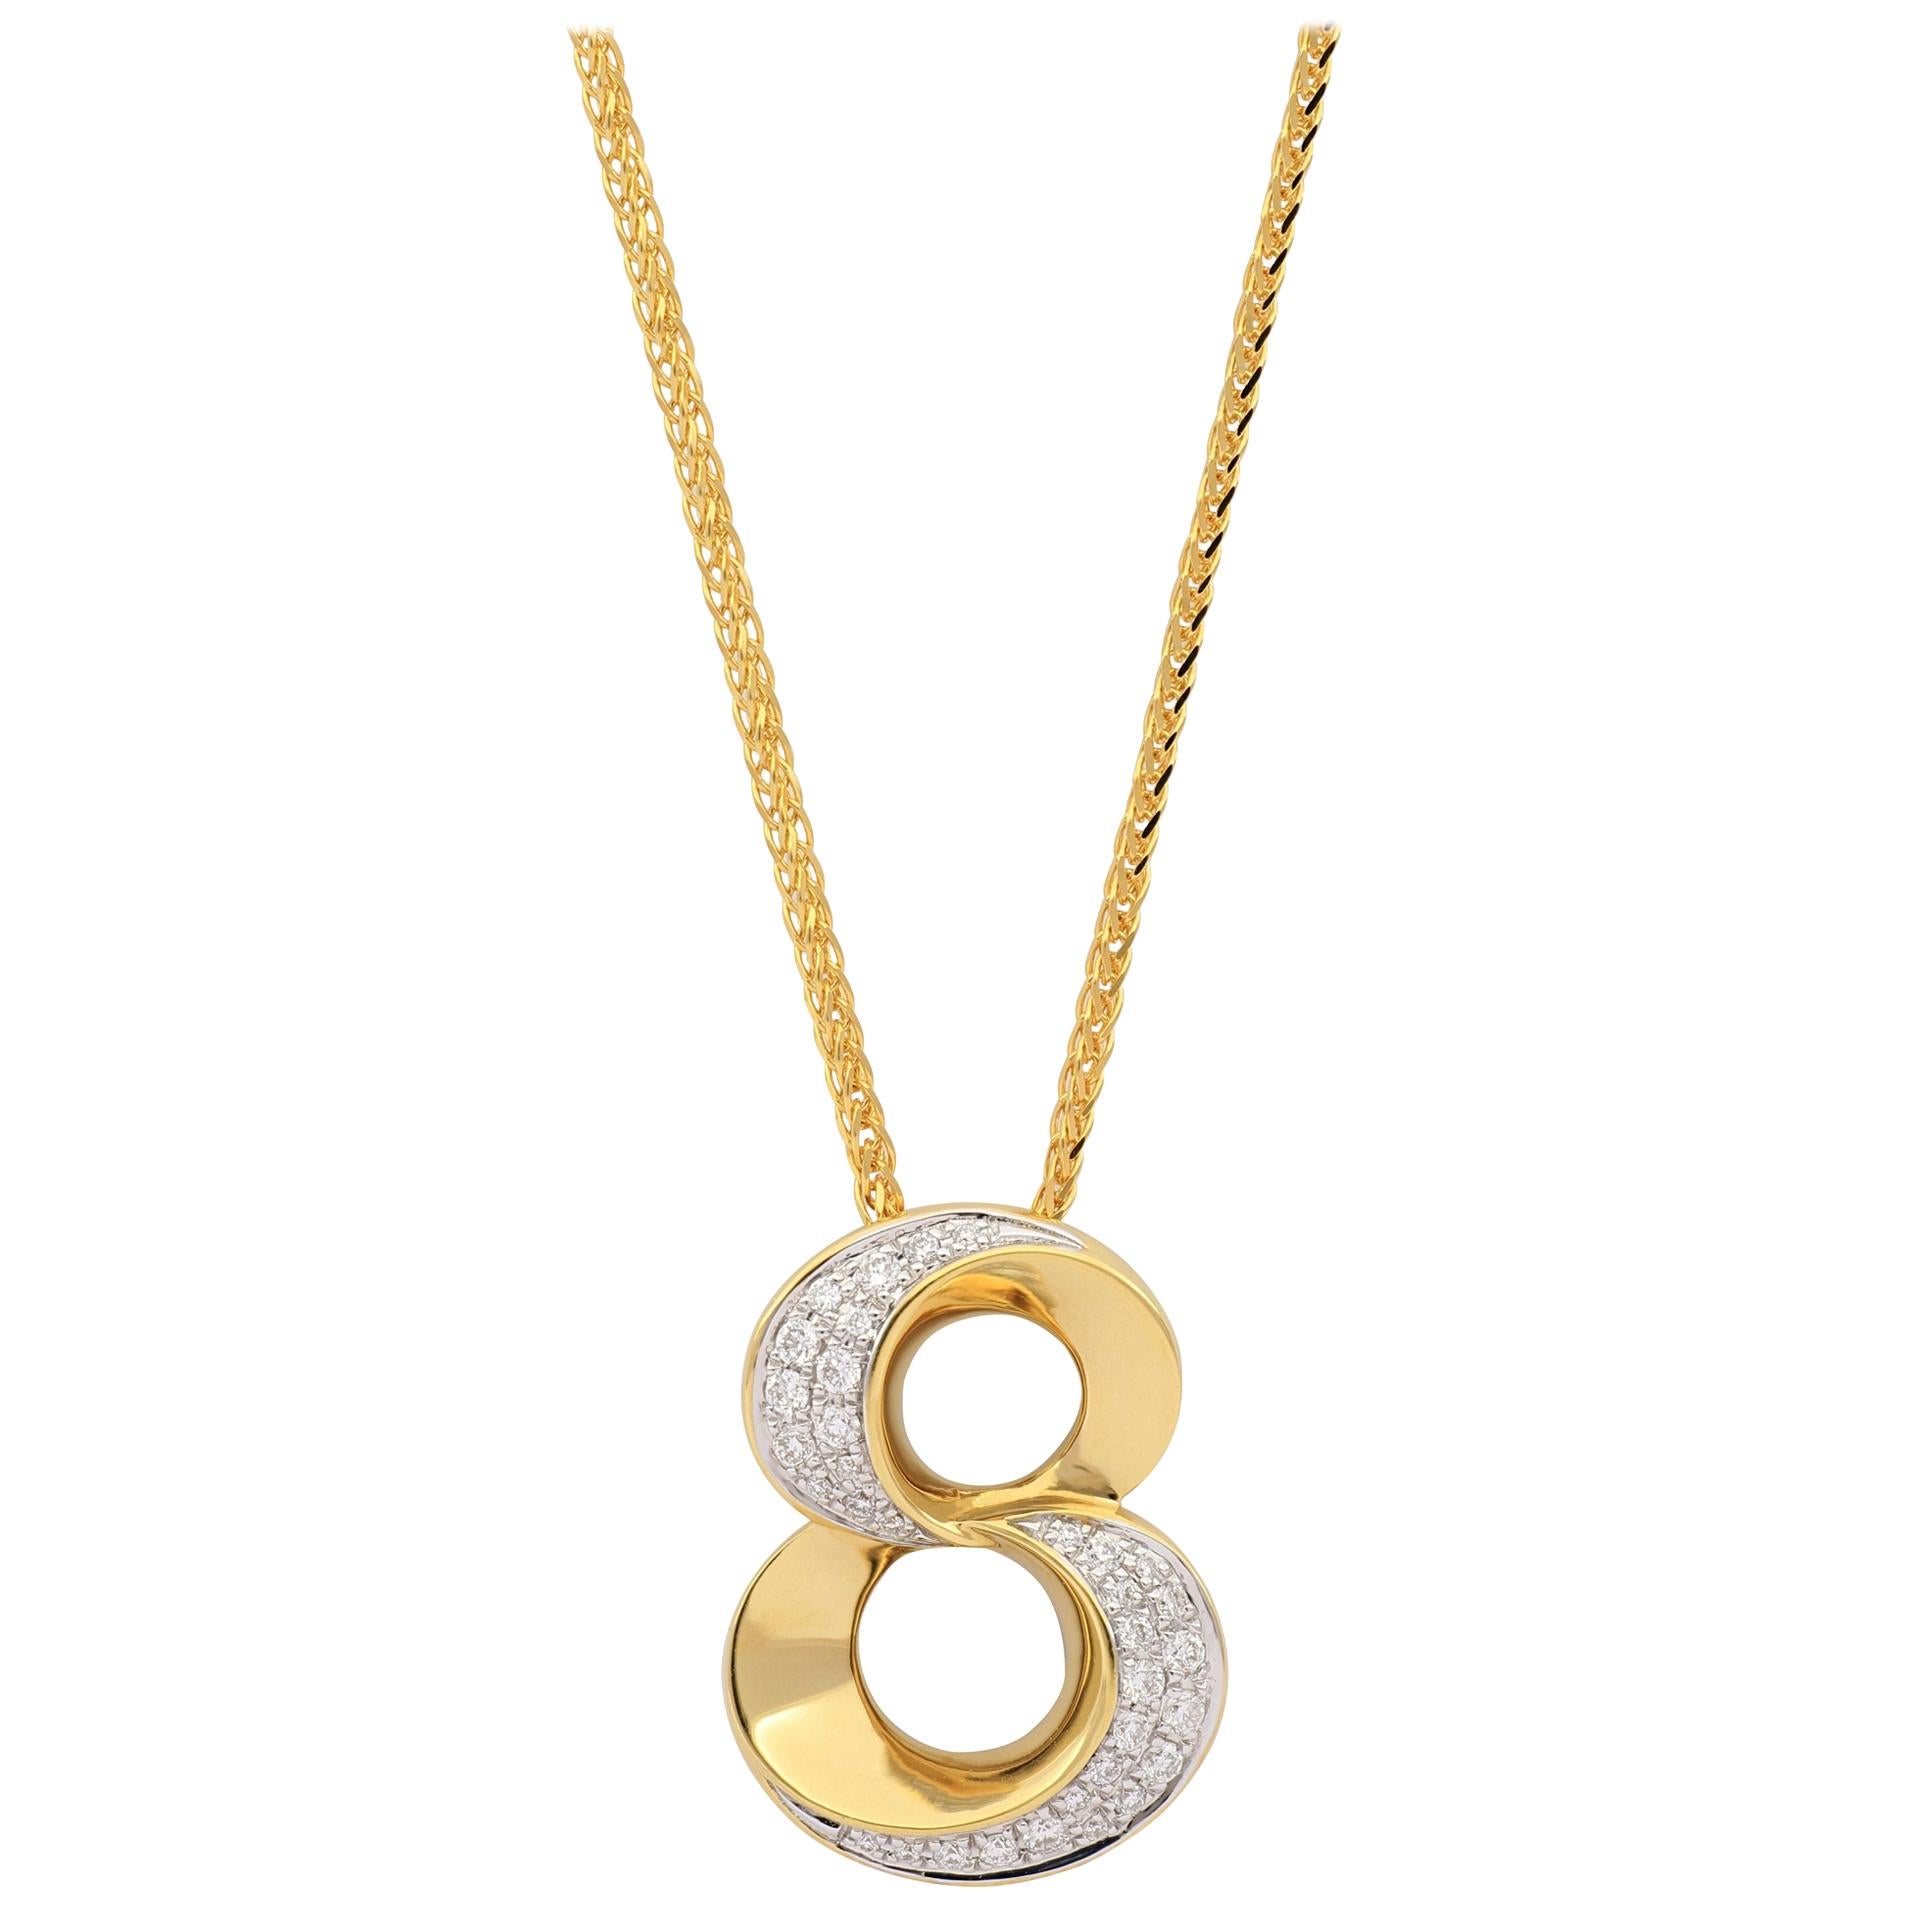 18 Karat Gold Number “8” Diamond Pendant with Necklace For Sale